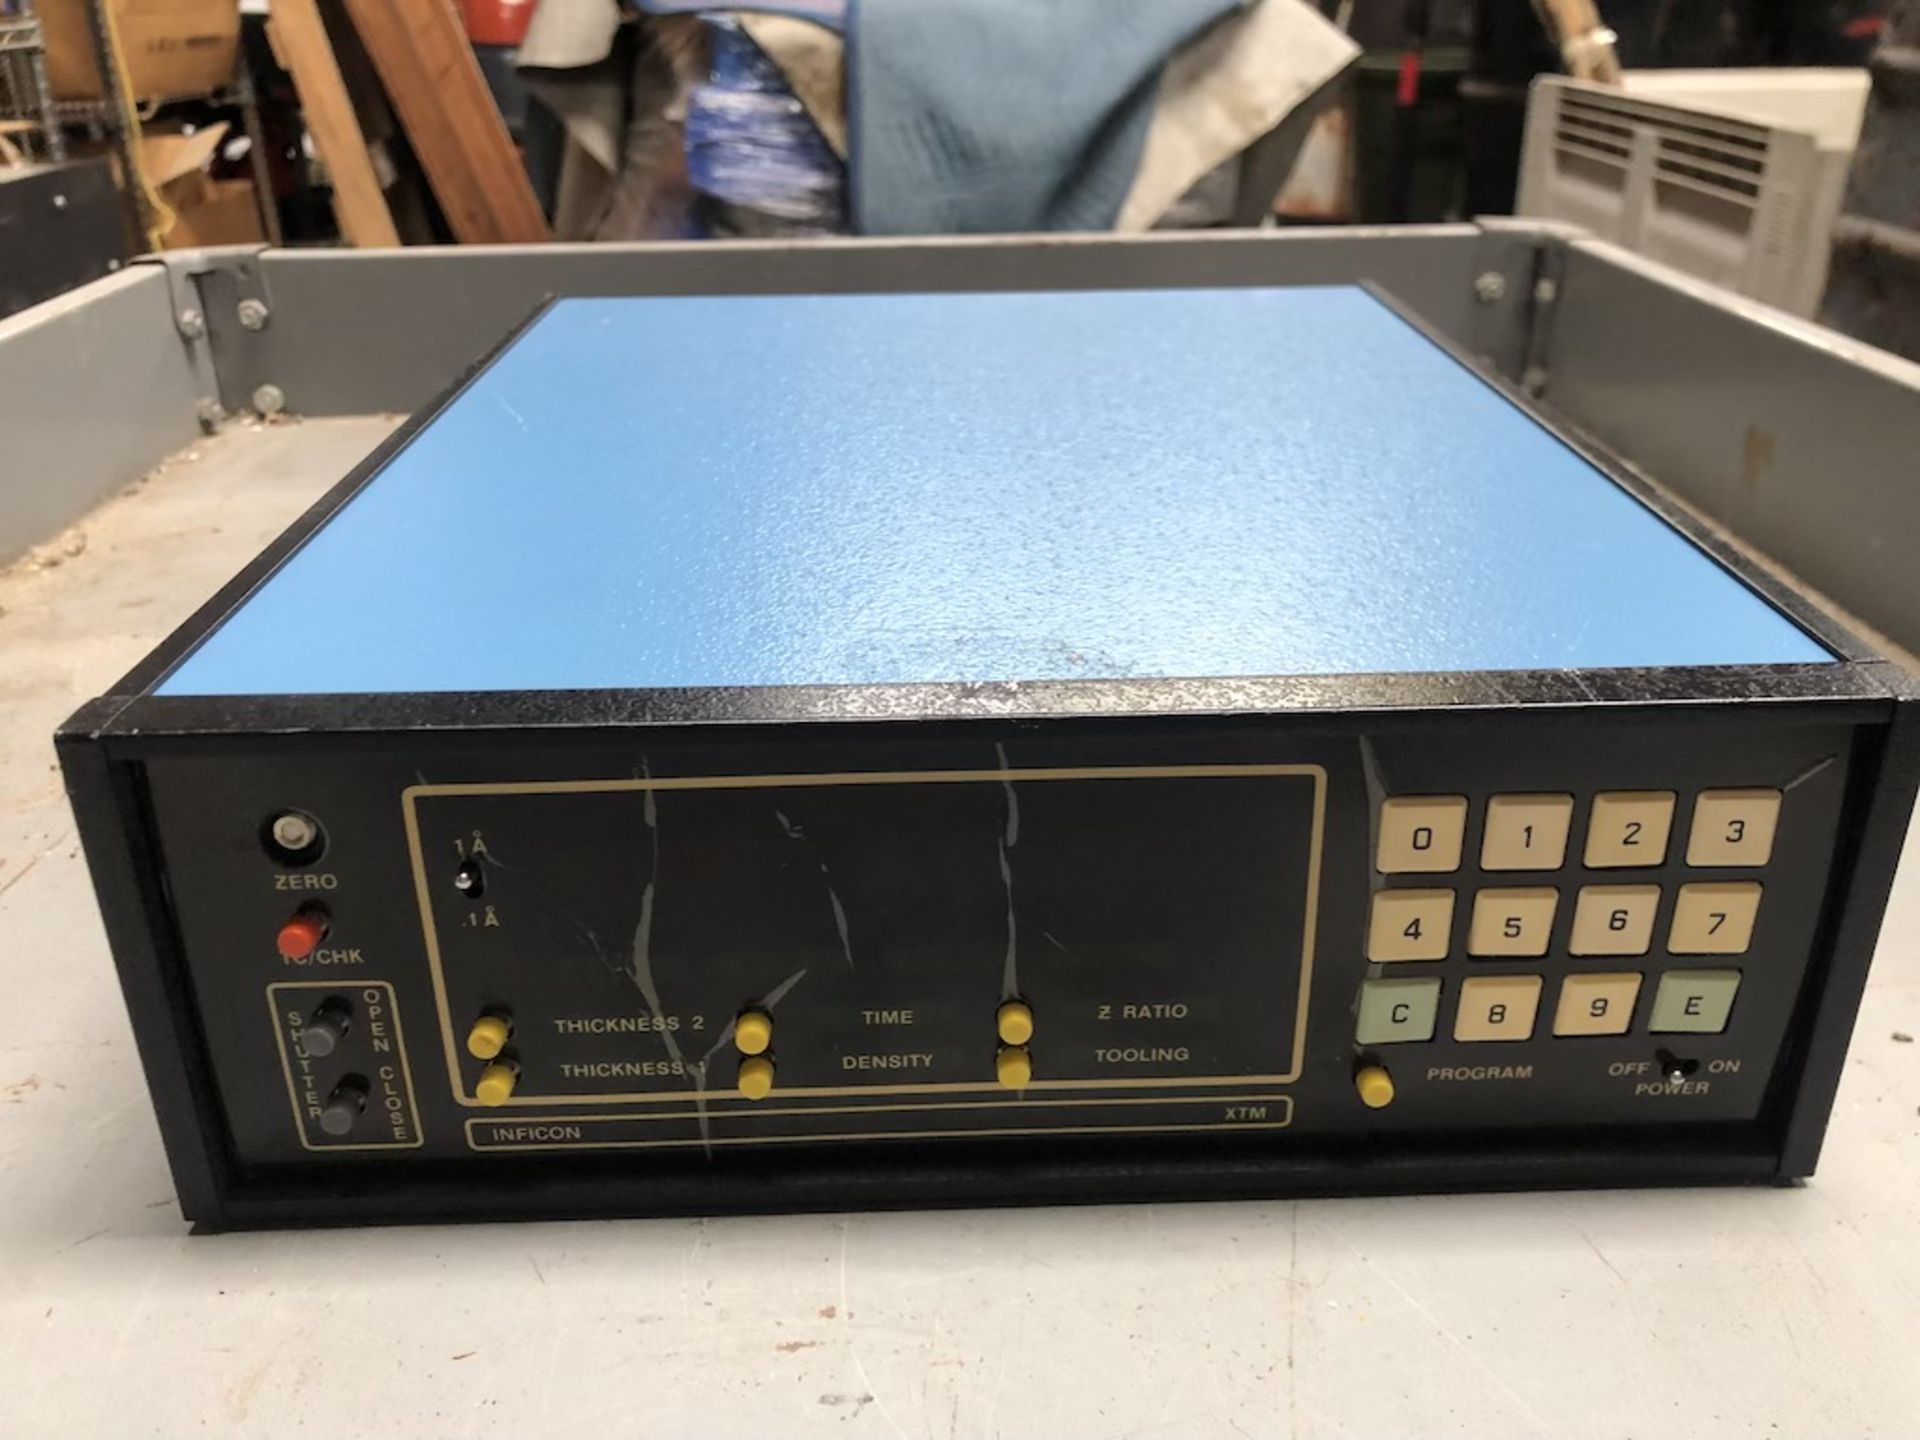 INFICON XTM THIN FILM DEPOSITION MONITOR 13-0008 - Image 4 of 8